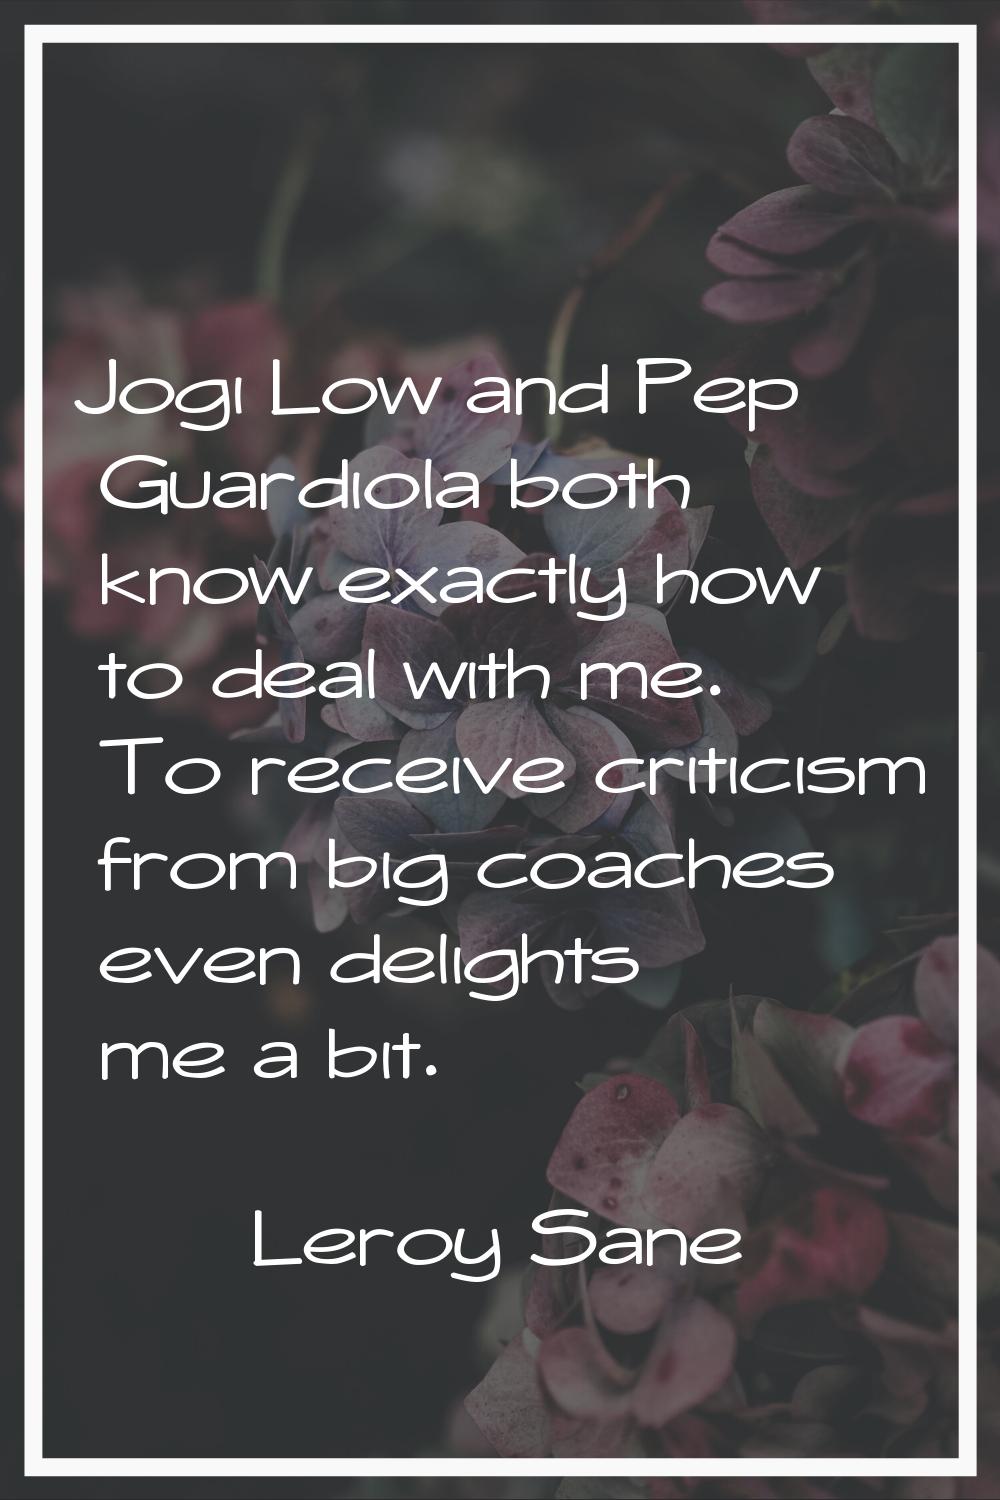 Jogi Low and Pep Guardiola both know exactly how to deal with me. To receive criticism from big coa